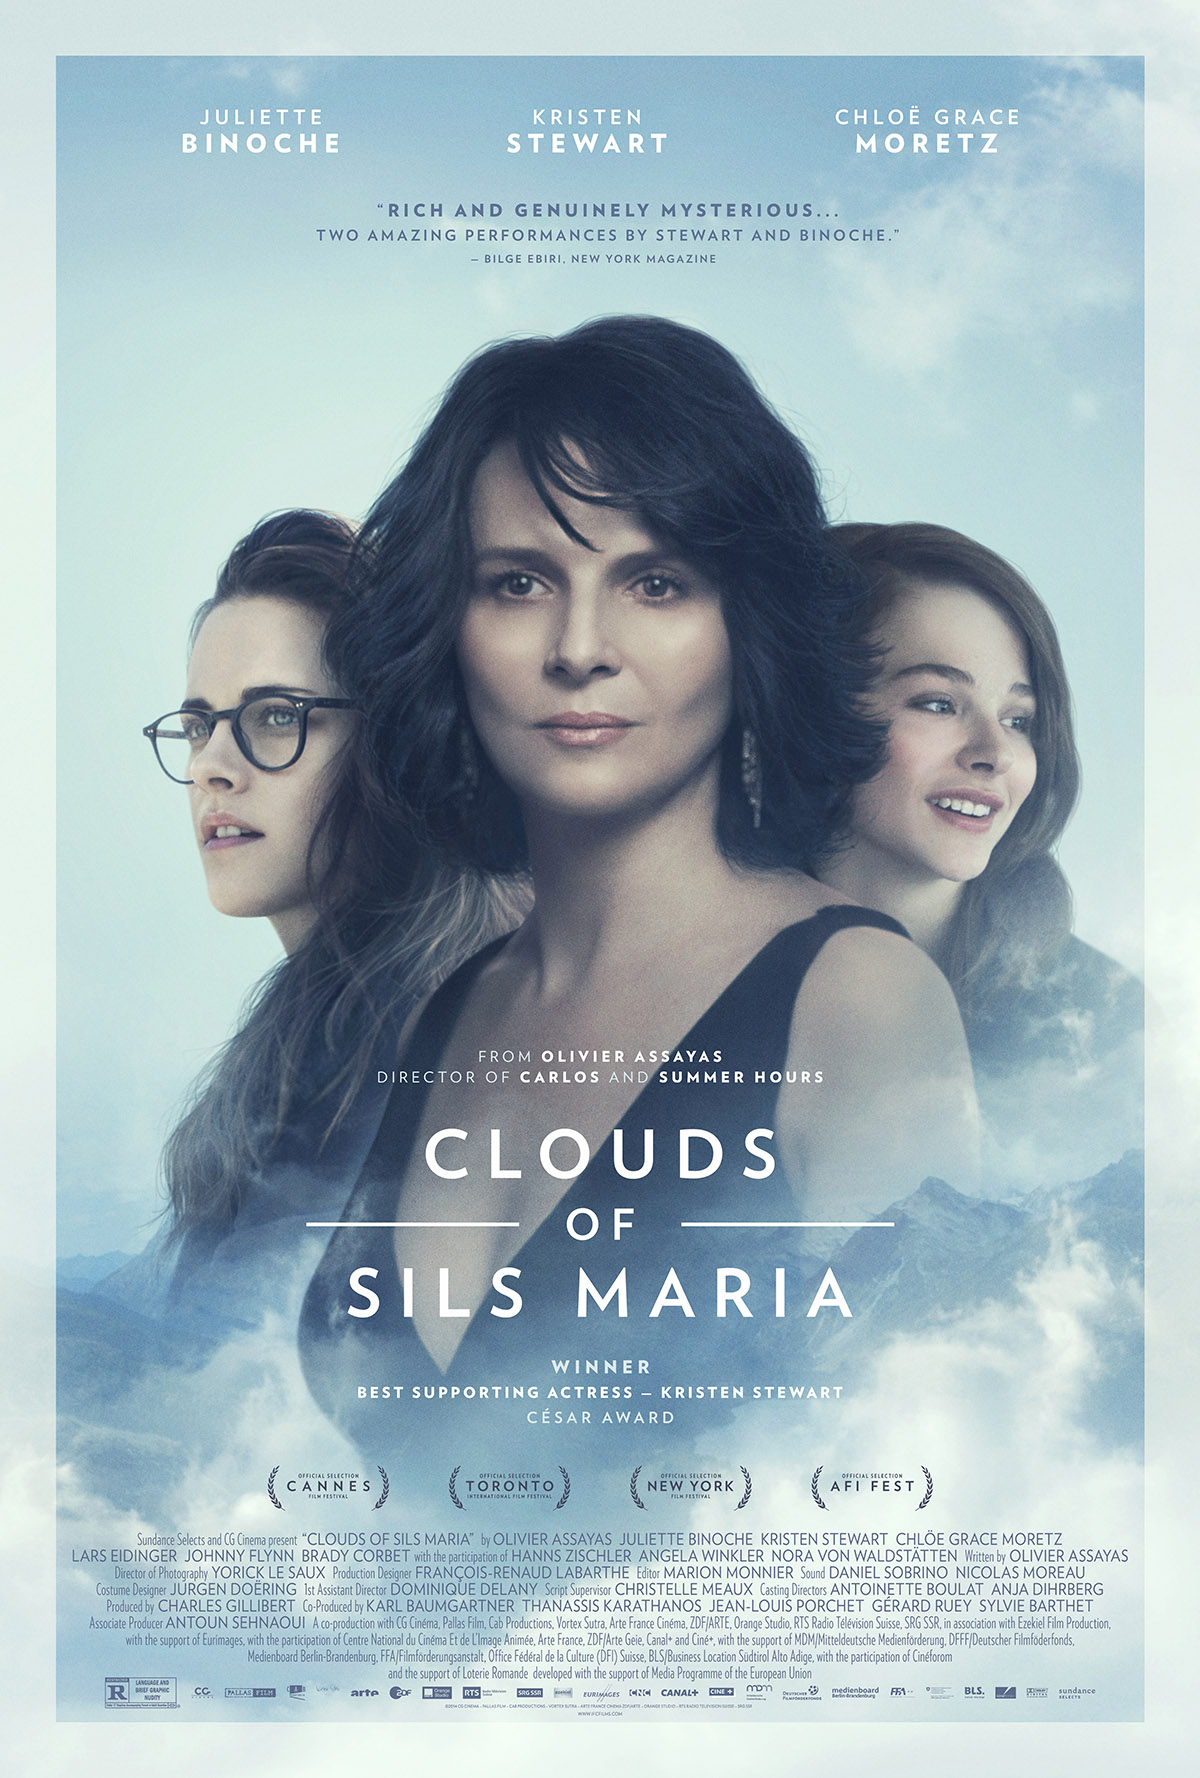 CLOUDS OF SILS MARIA POSTER